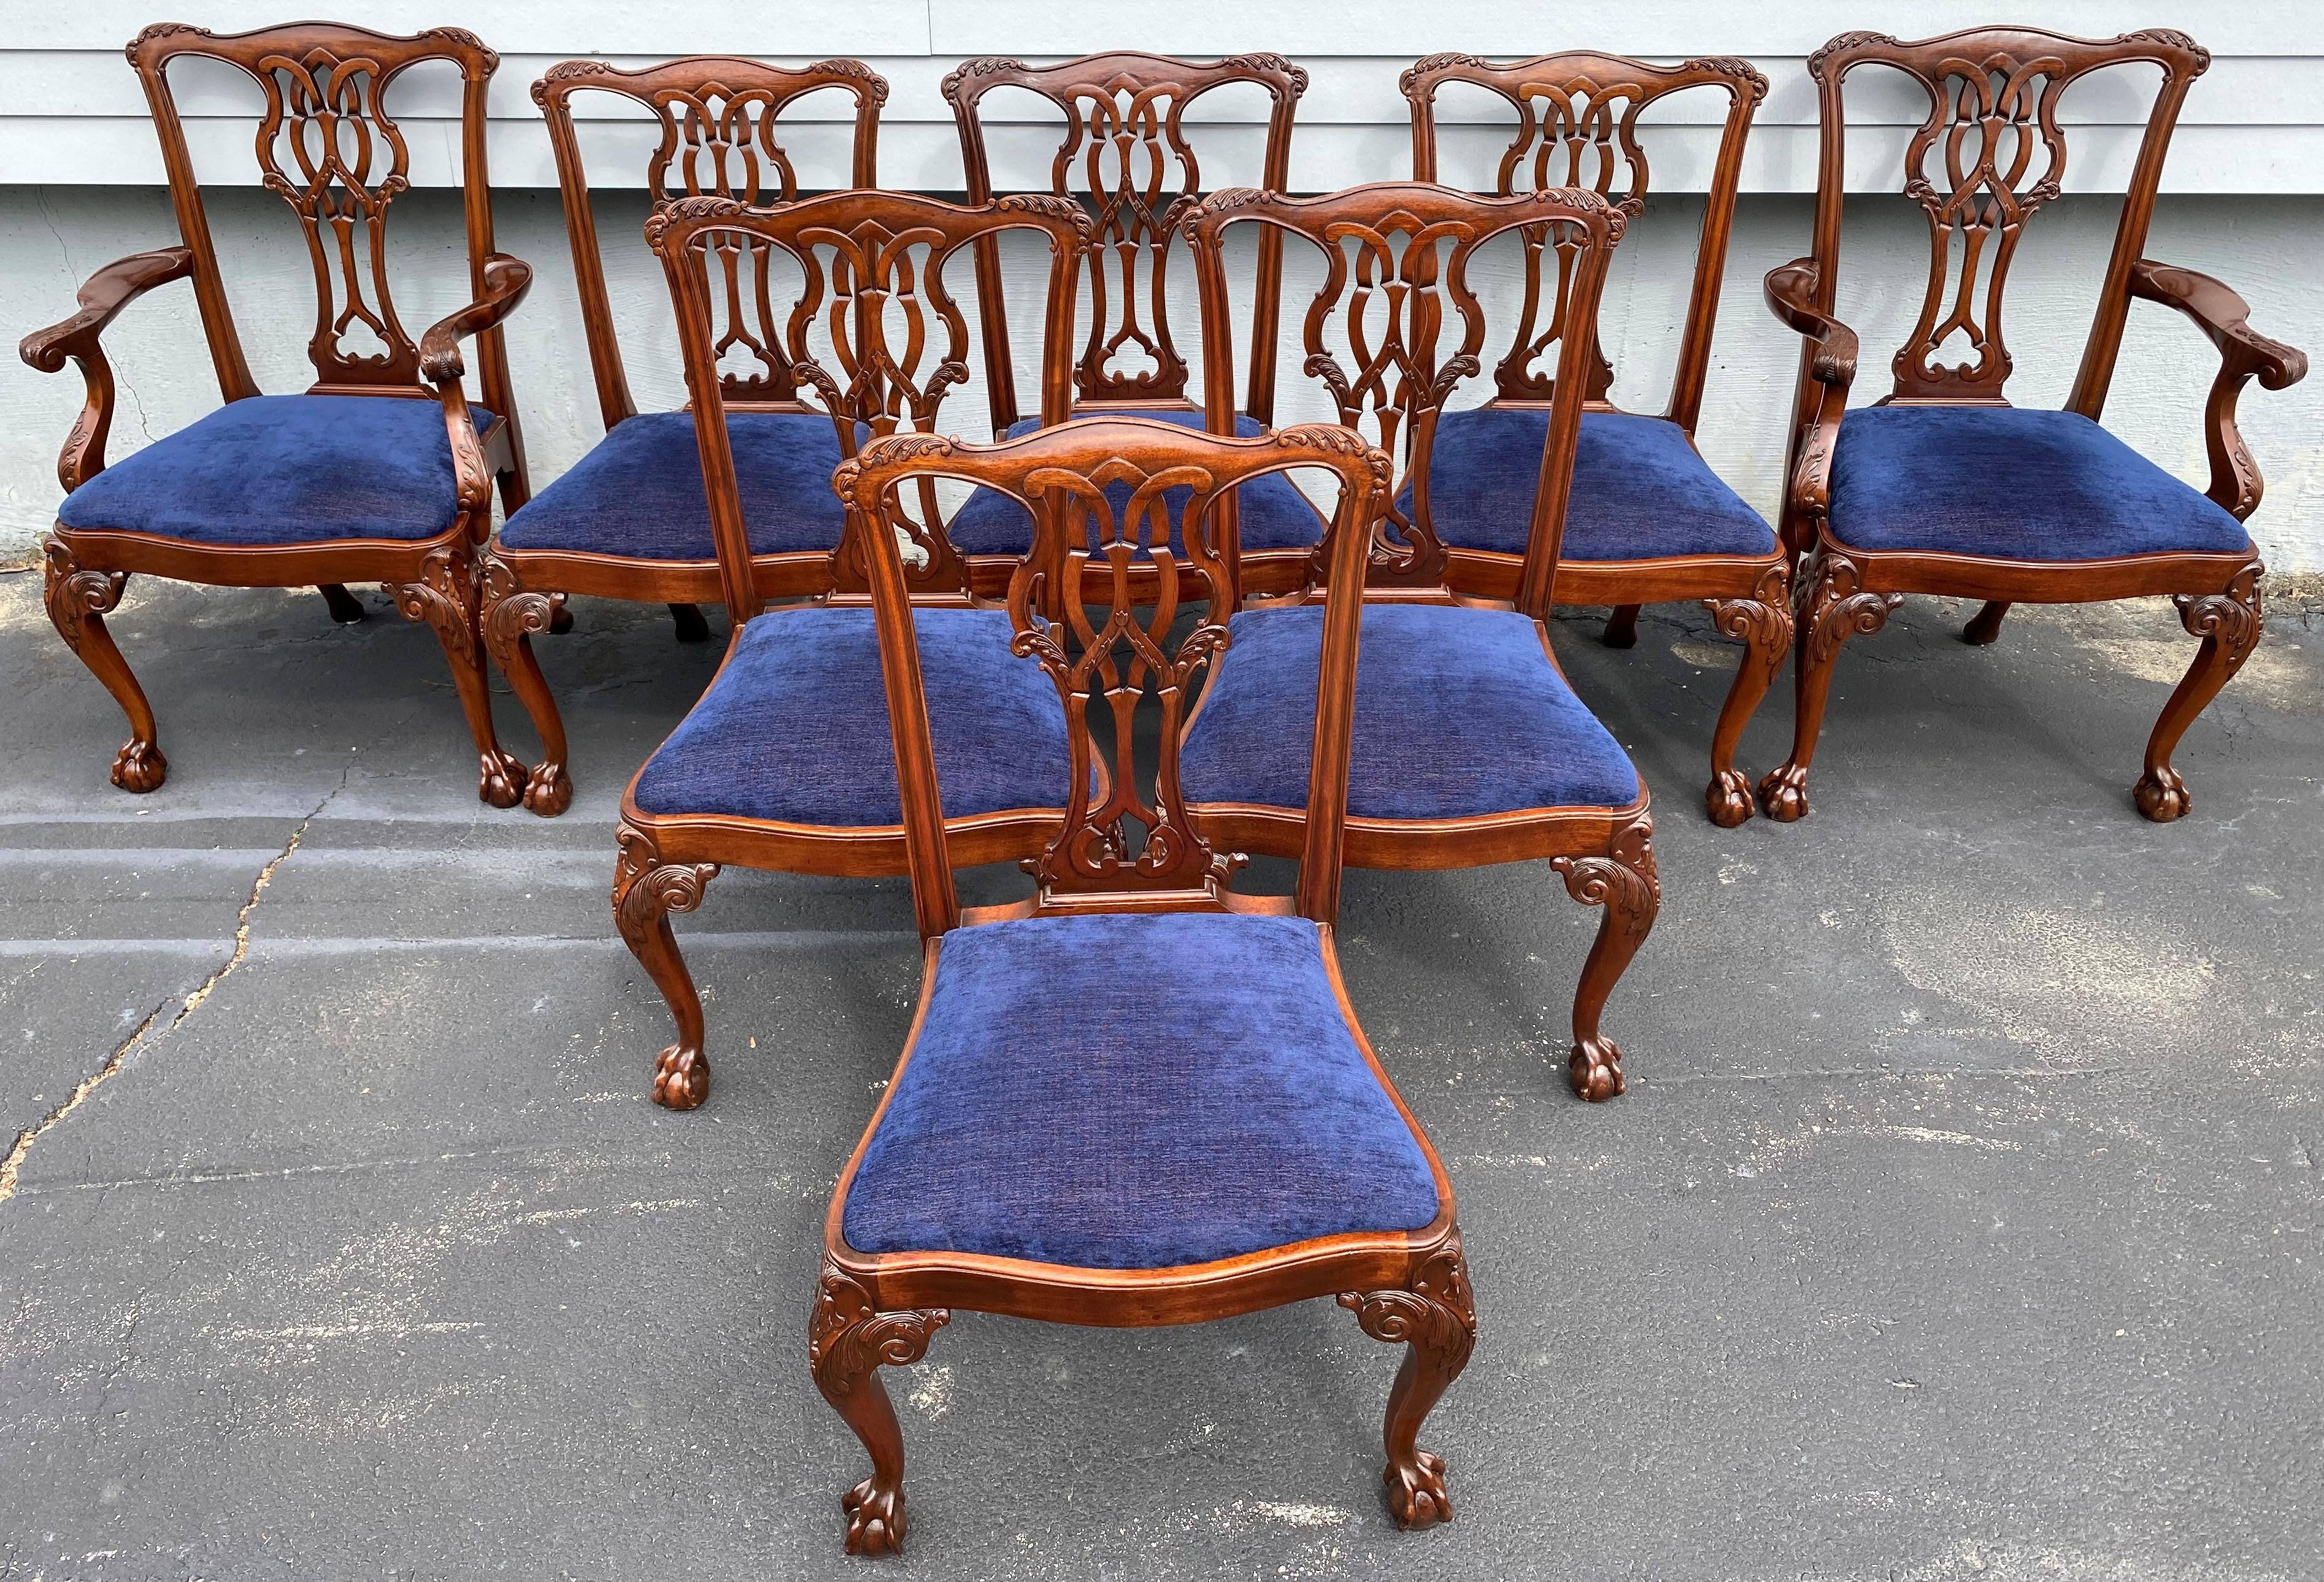 A fine solid set of eight Chippendale style mahogany dining chairs, including two arm chairs and six side chairs, with upholstered blue slip seats and beautifully detailed scroll carved crests, splats, and front cabriole legs with ball and claw